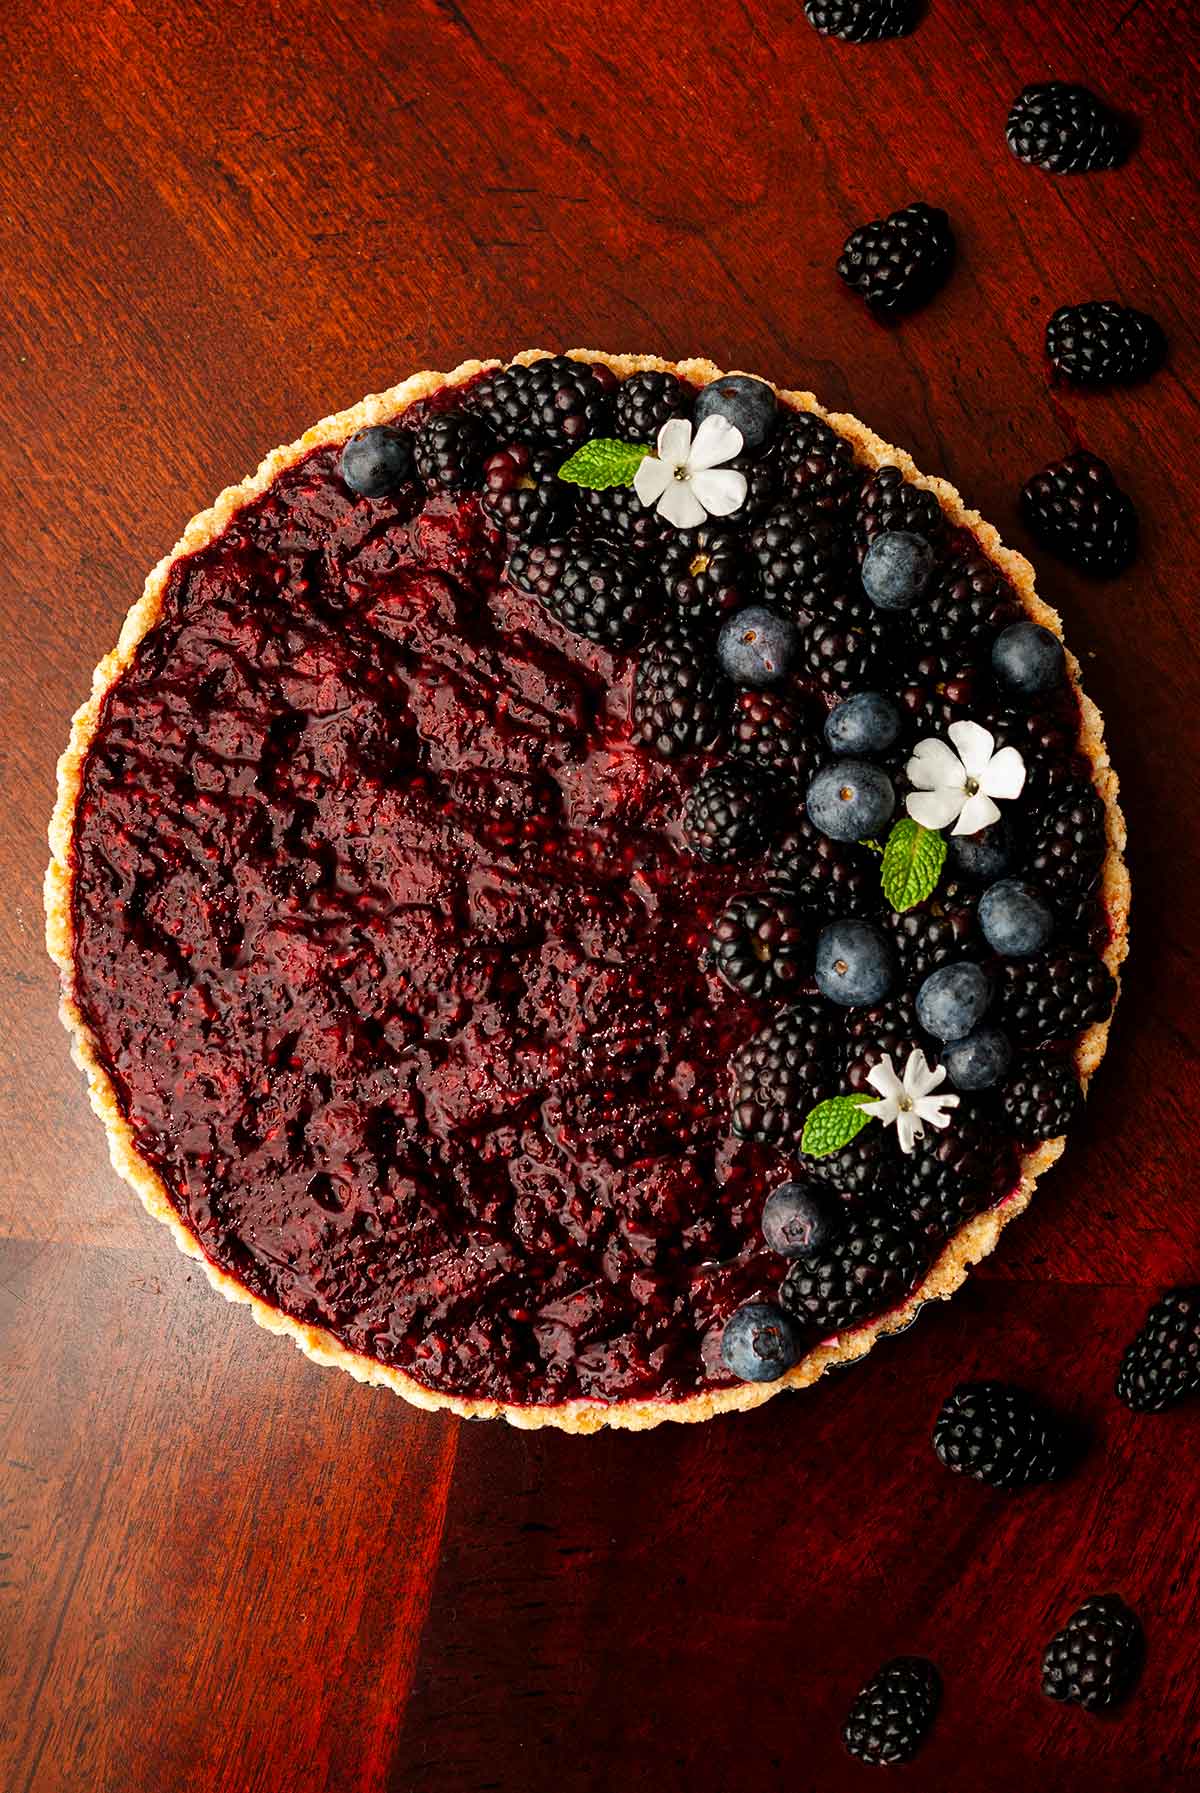 A blackberry Sorel cheesecake on a wooden table, garnished with berries and flowers.